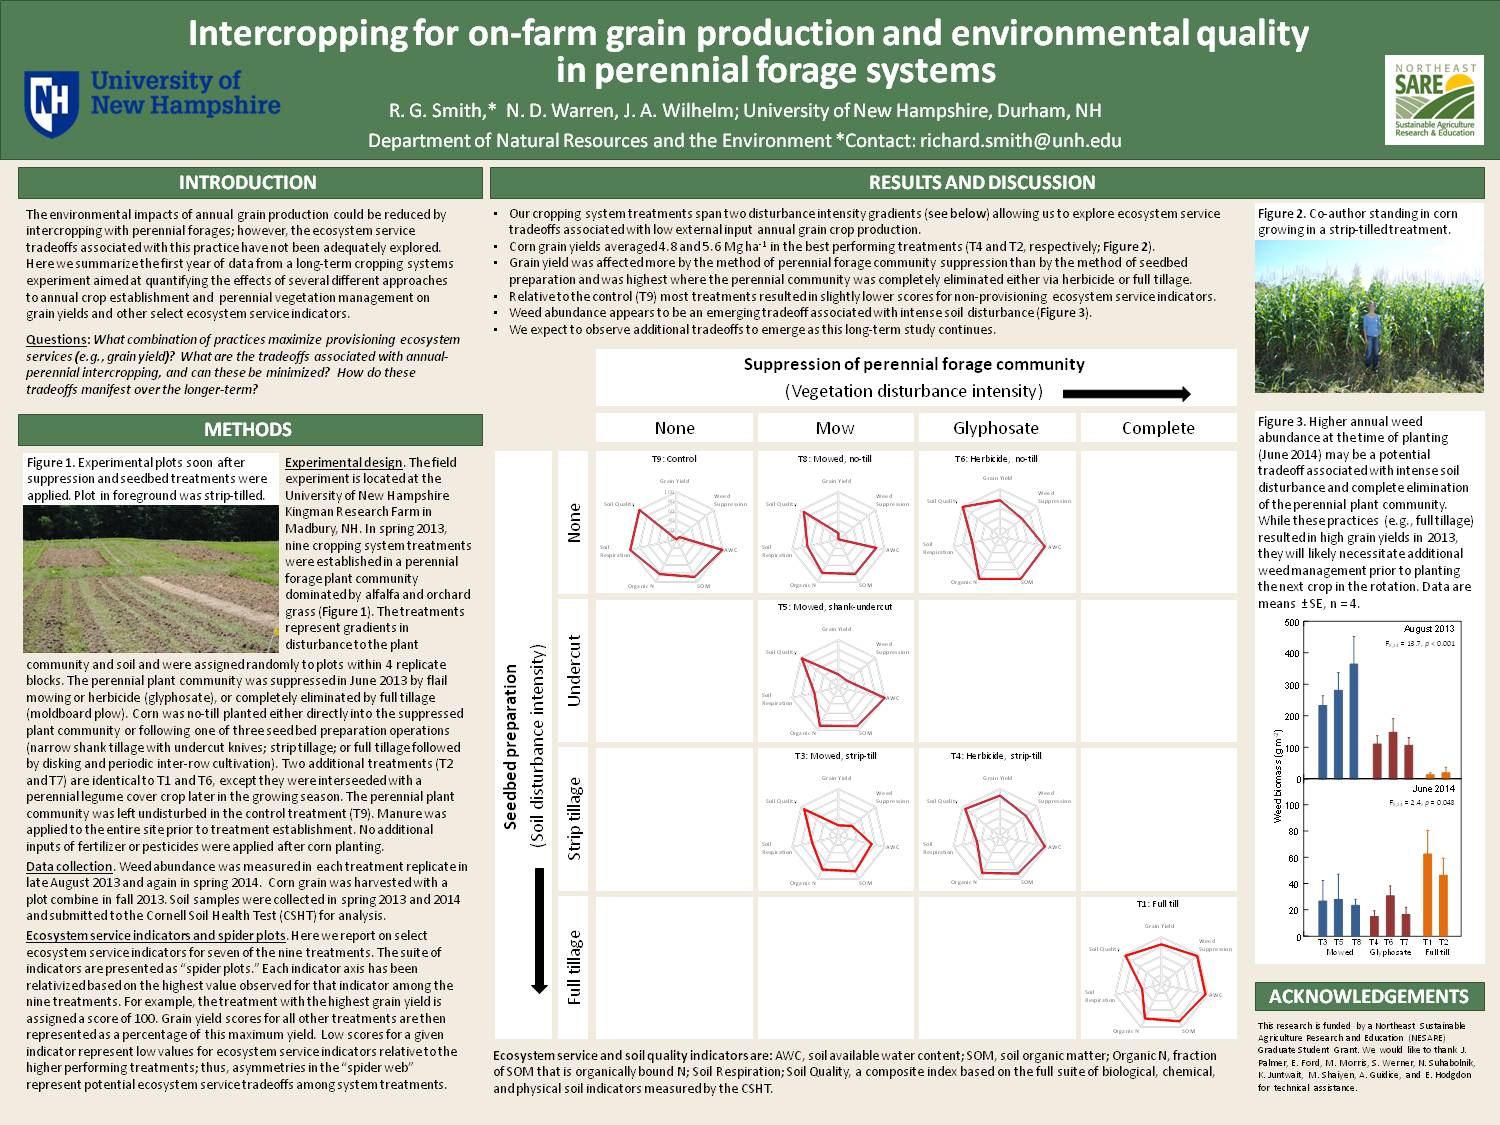 Intercropping For On-Farm Grain Production And Environmental Quality In Perennial Forage Systems by jwilhelm